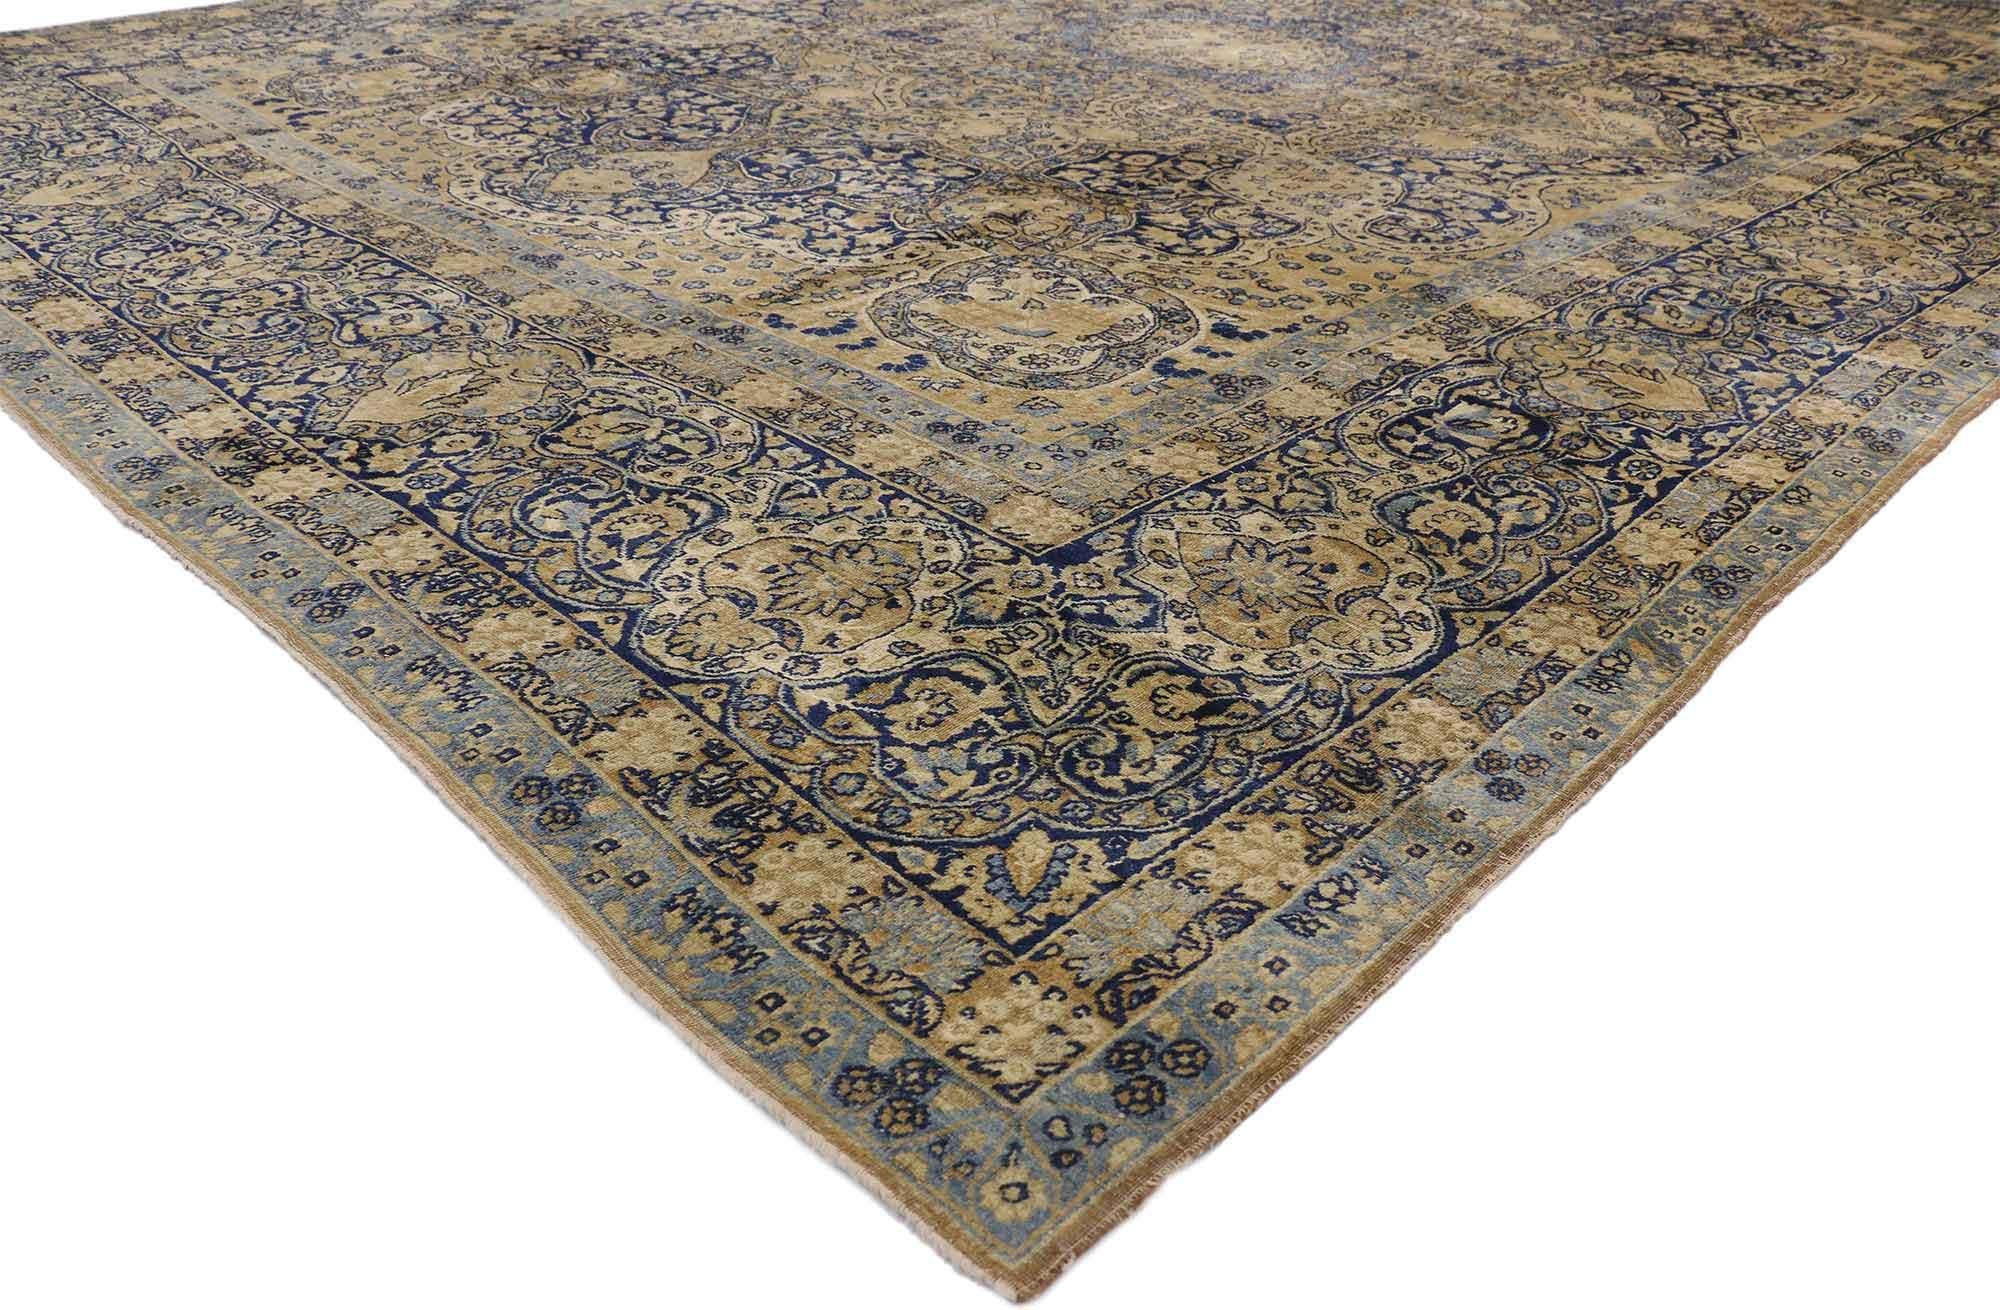 73956 Distressed Antique Persian Yazd rug 11'02 X 15'09. With its perfectly worn-in charm and rustic sensibility, this hand-knotted wool distressed antique Persian Yazd rug will take on a curated lived-in look that feels timeless while imparting a